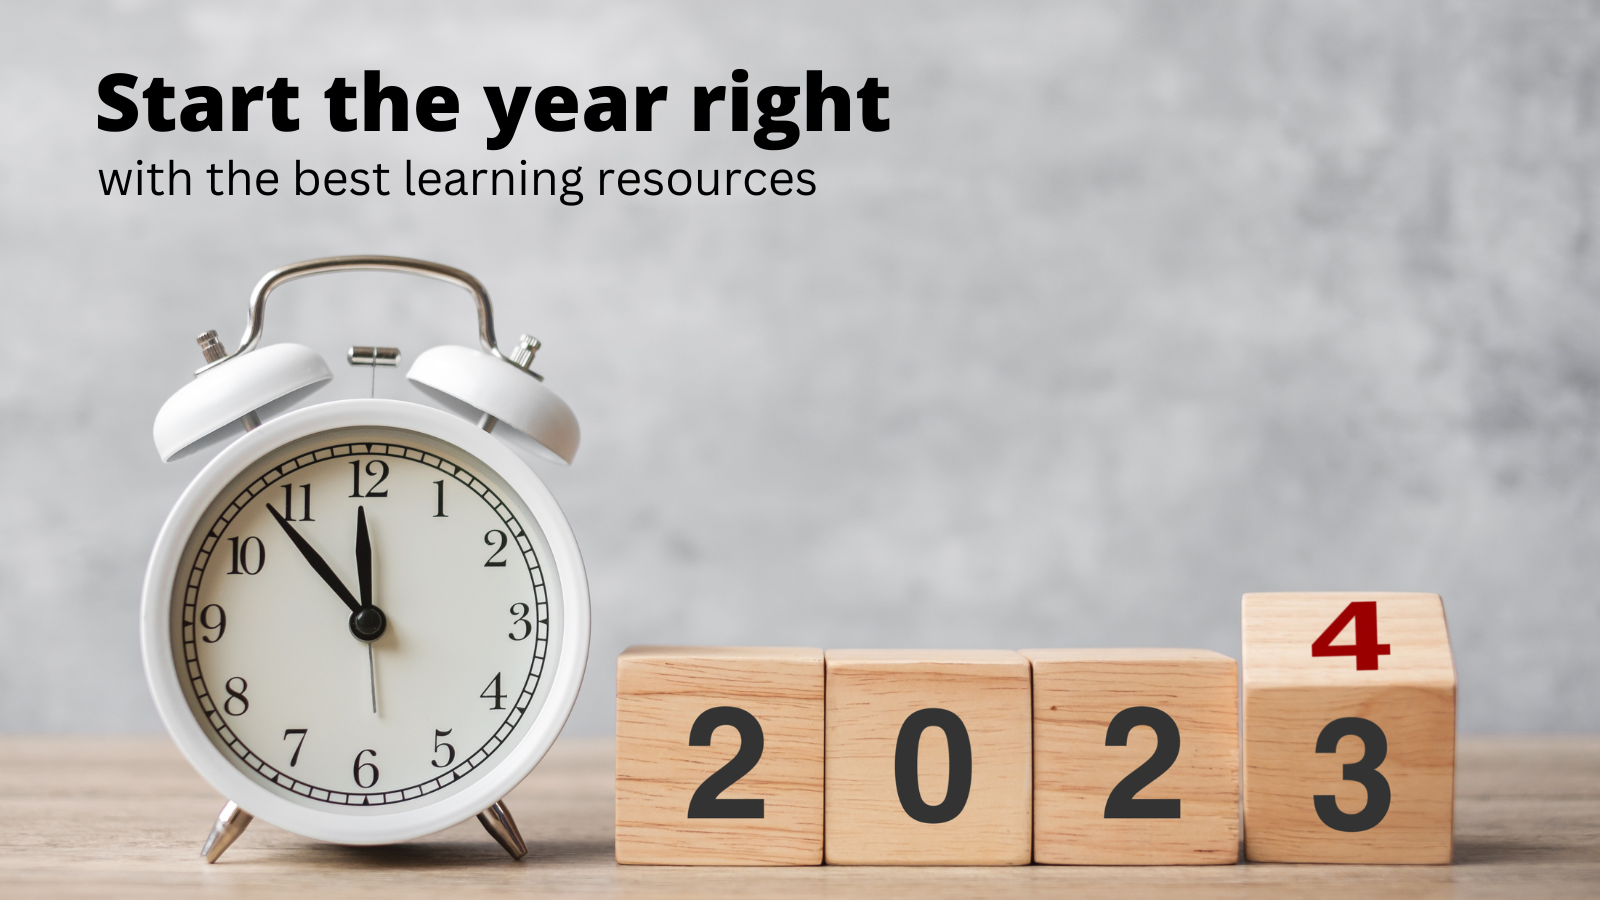 Start the year right with the best learning resources